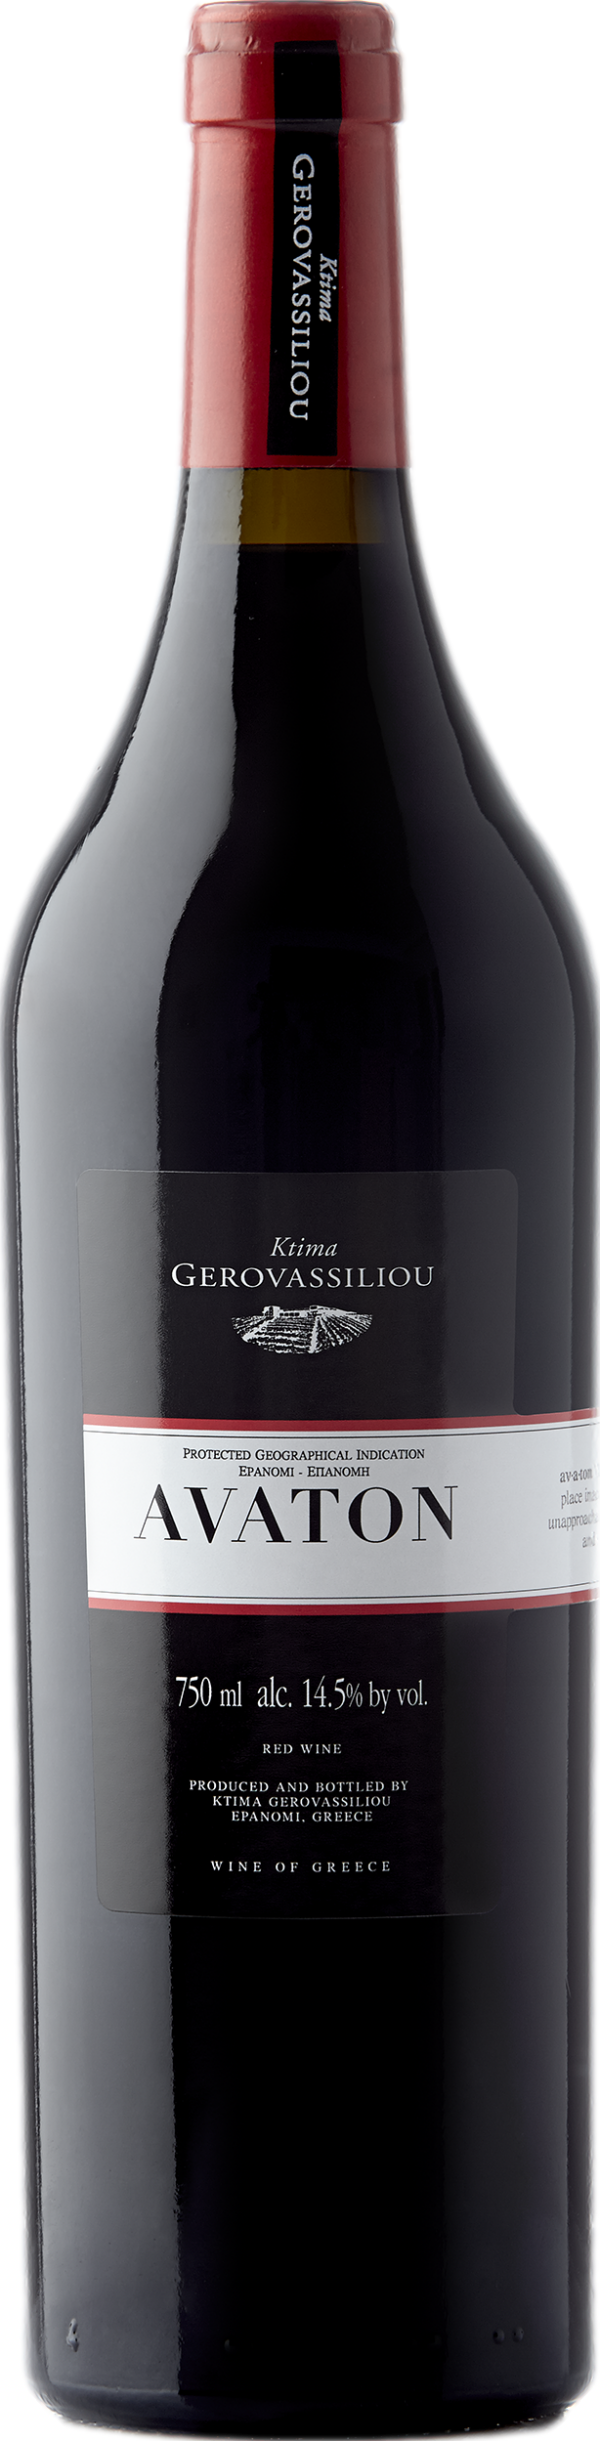 Product image of Ktima Gerovassiliou Avaton 2020 from 8wines